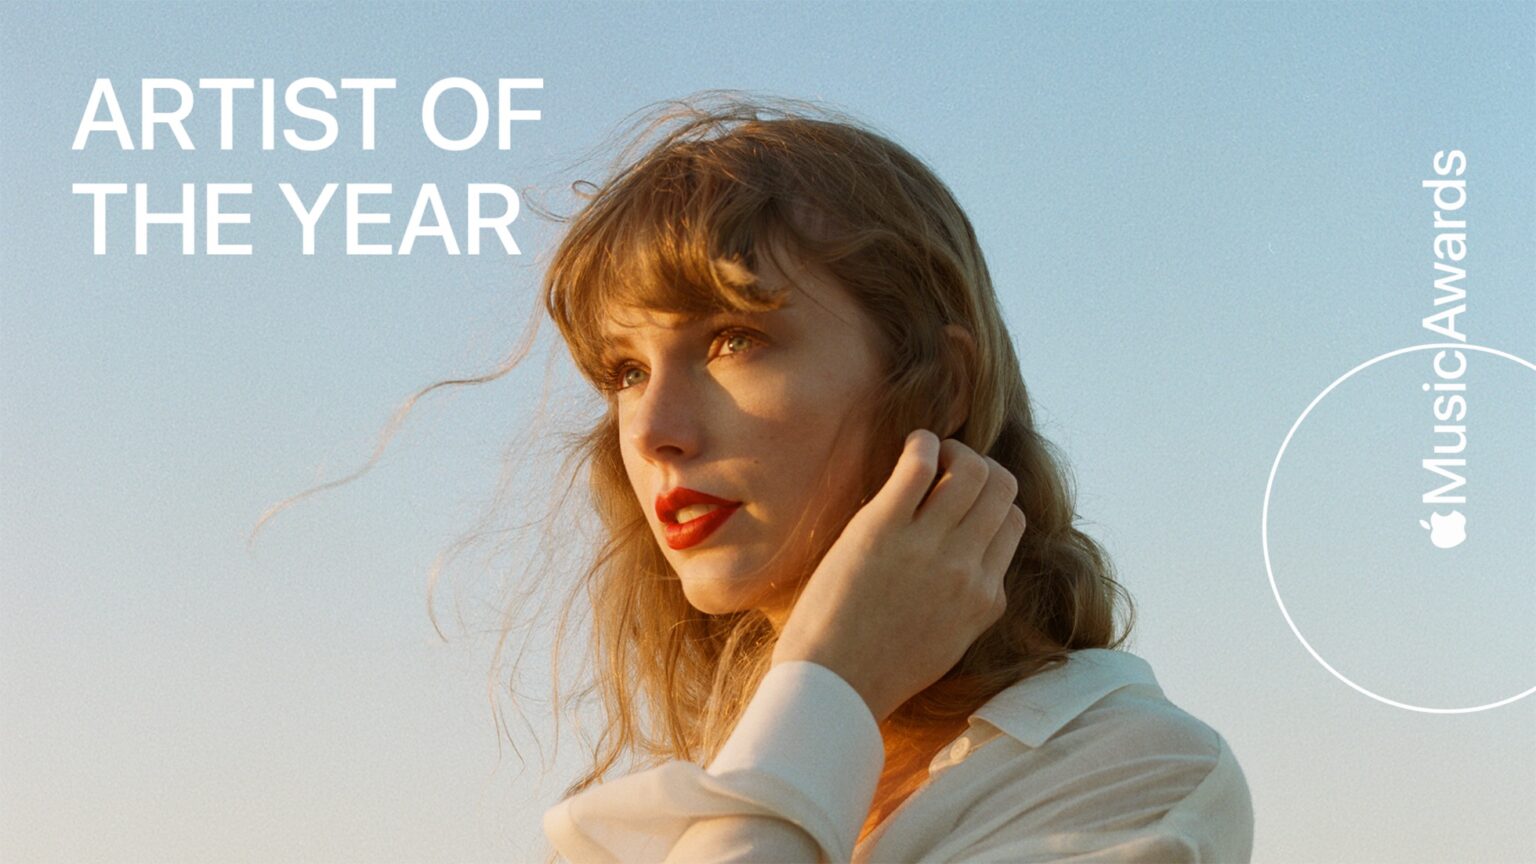 Taylor Swift named Apple Music’s Artist of the Year